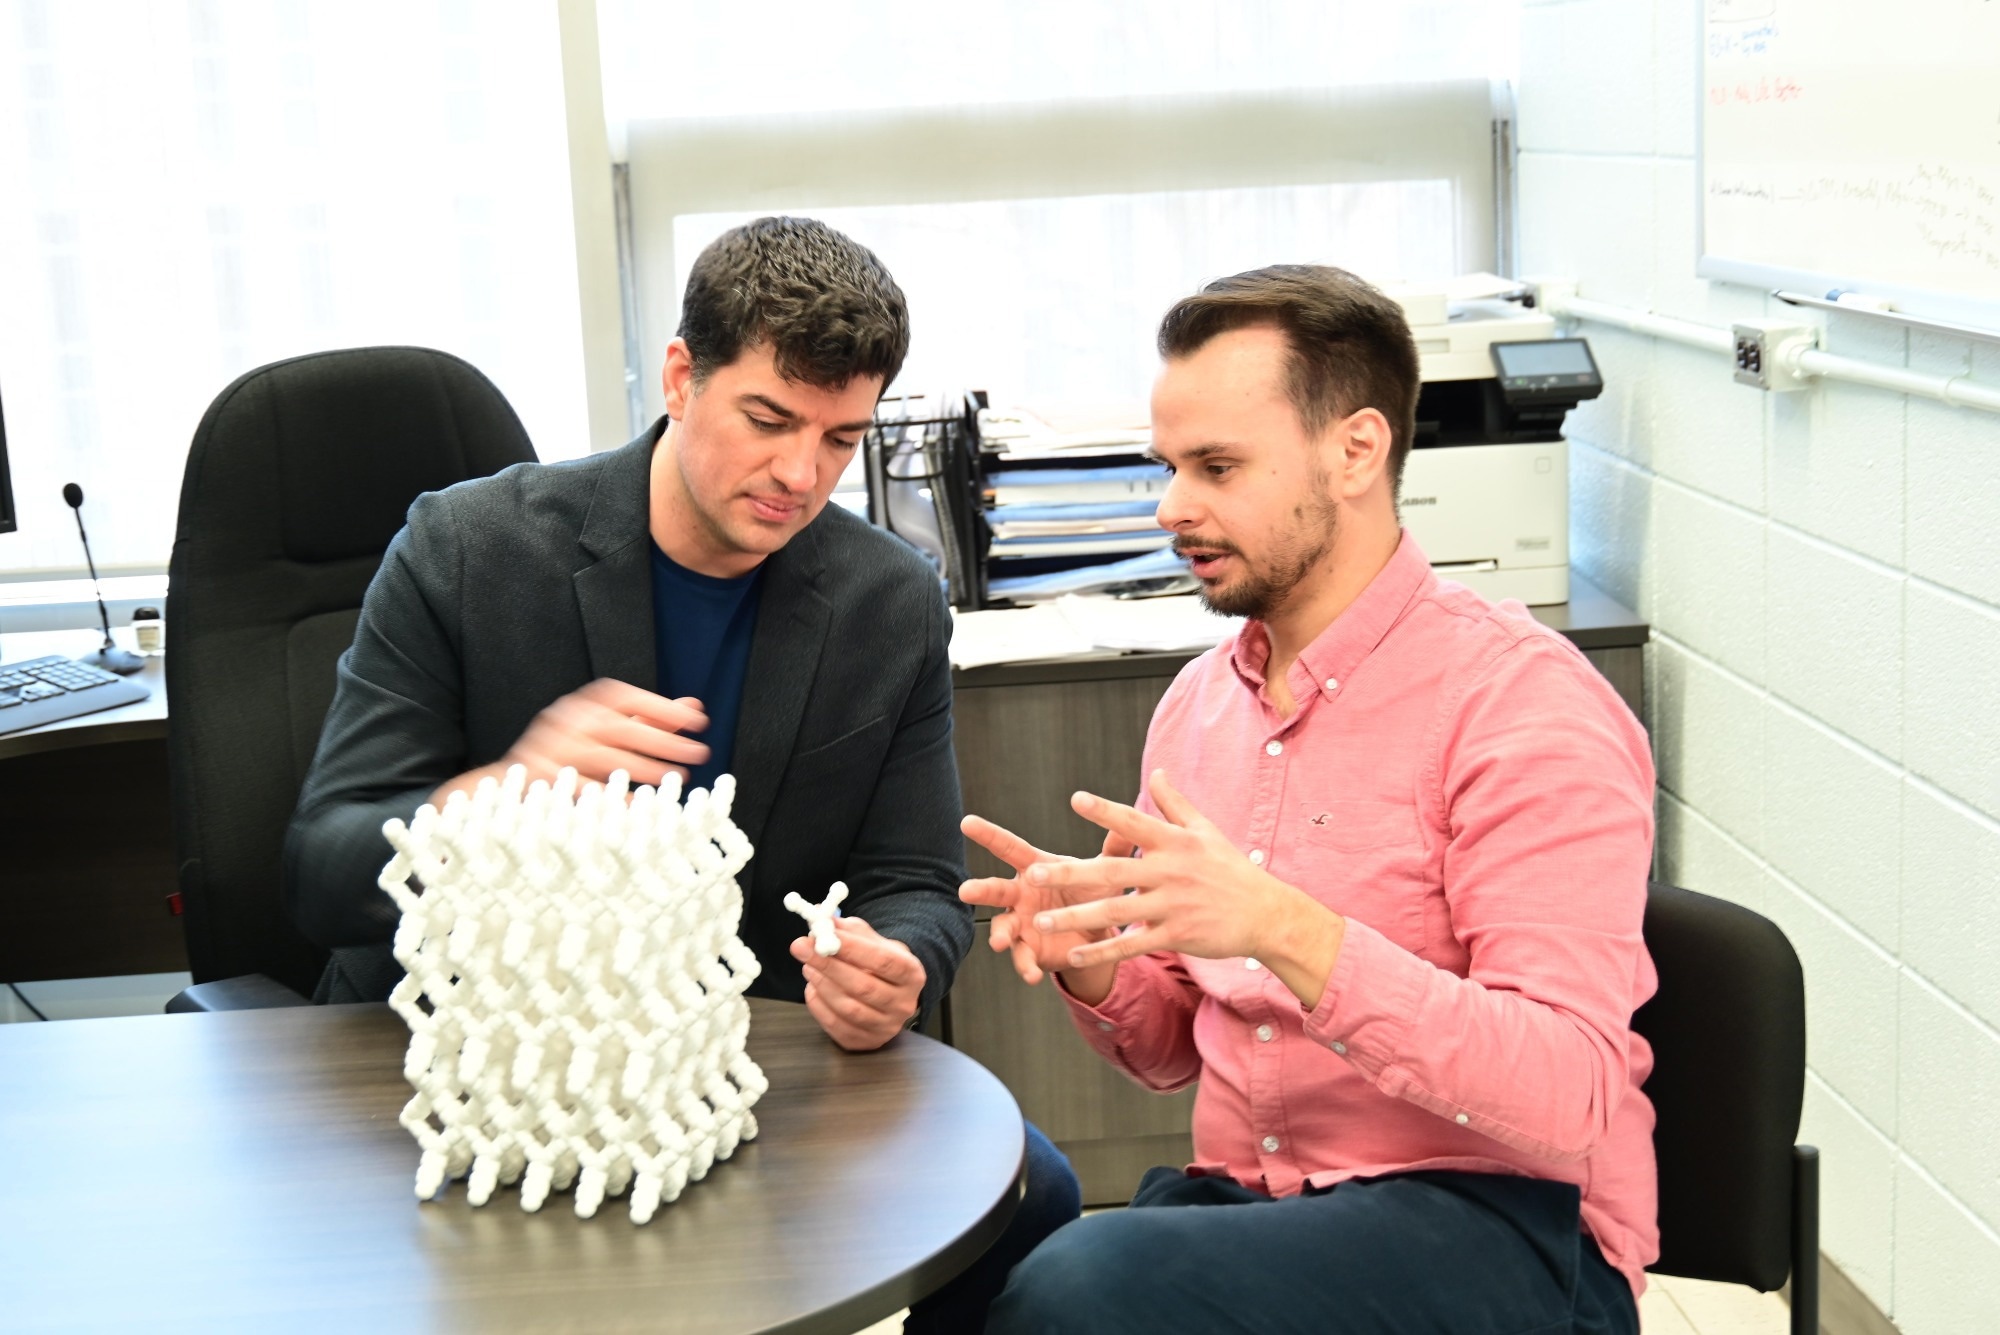 Prof. Nicholas Vukotic and Dr. Anton Dmitrienko examine a 3D-printed crystal structure at the University of Windsor as part of their crystal engineering research.